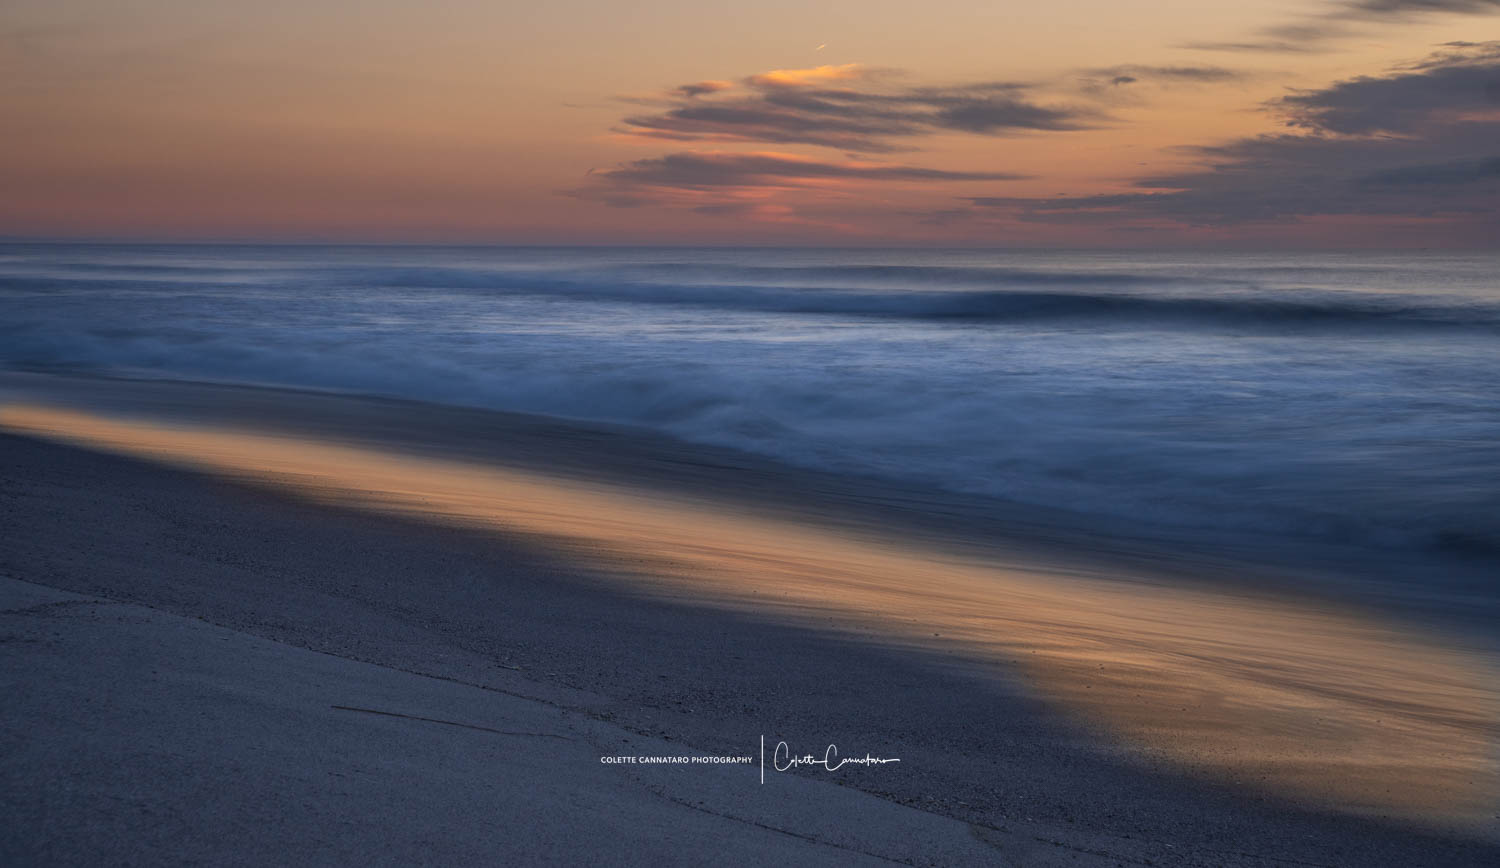 The iconic Jersey Shore at sunrise